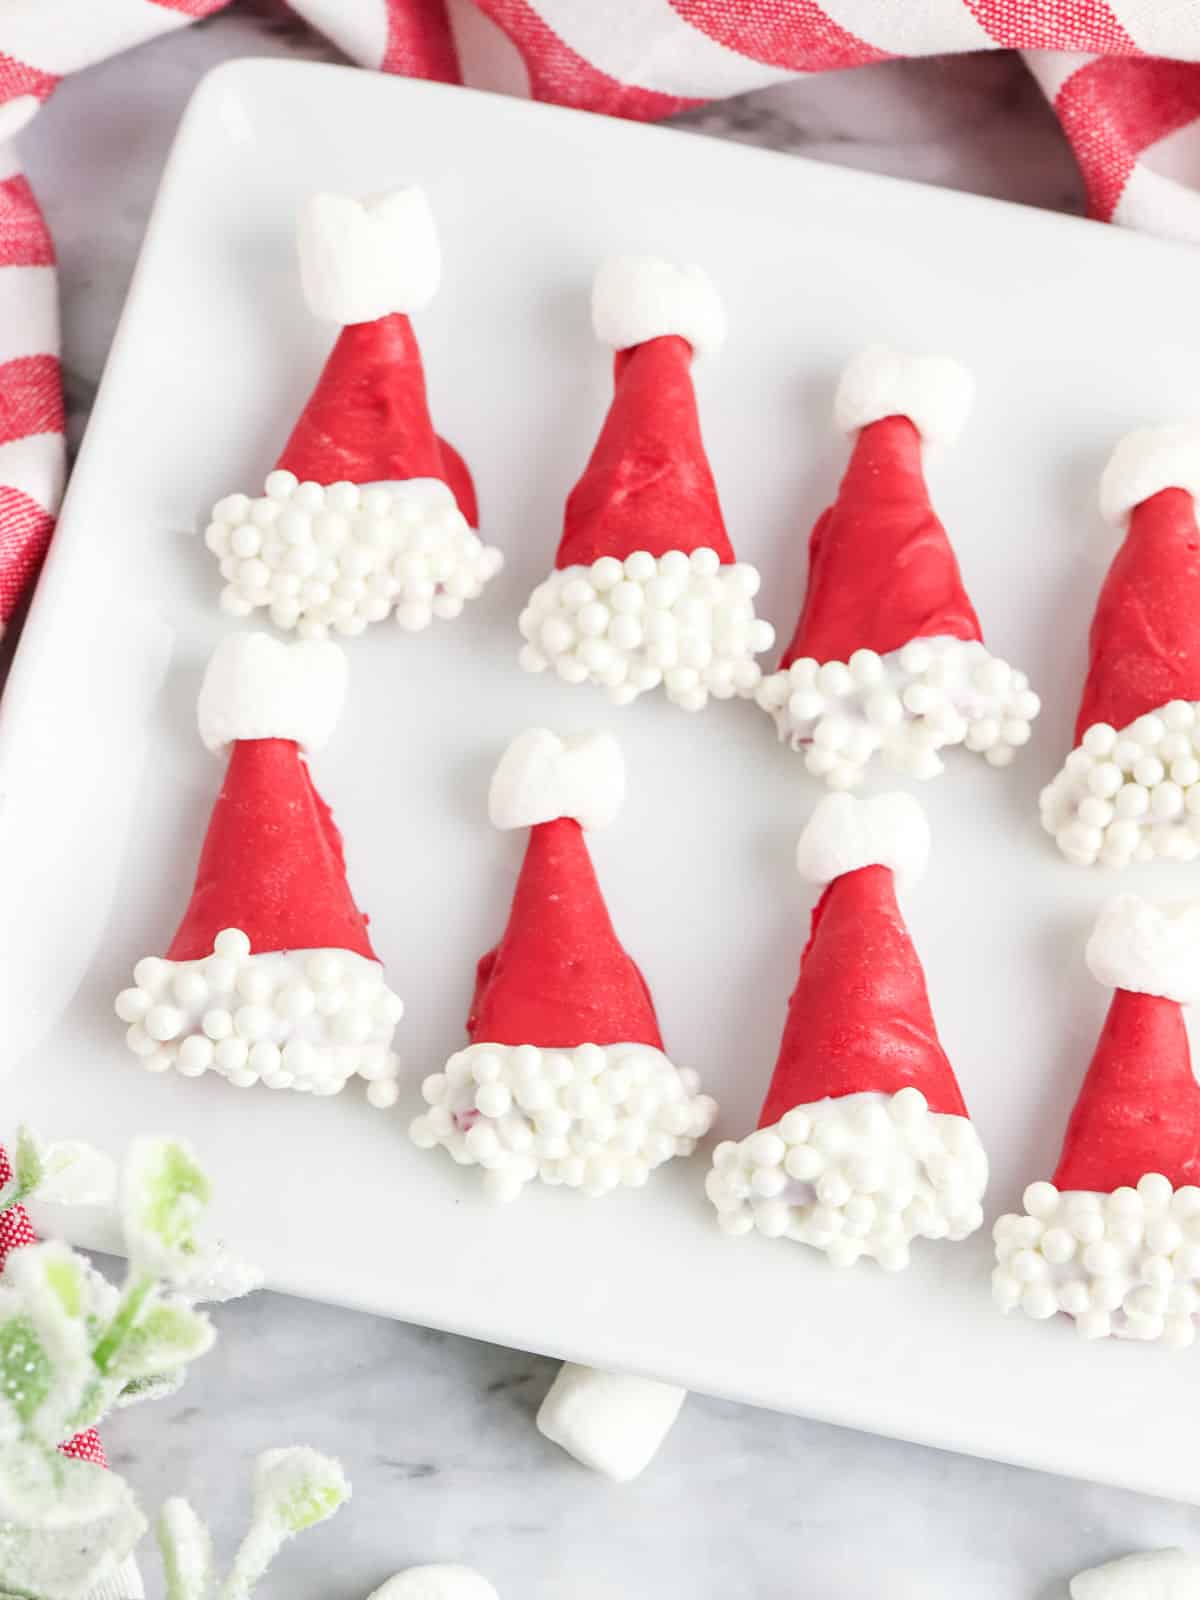 Santa hat dipped Bugles with marshmallows on a white plate.